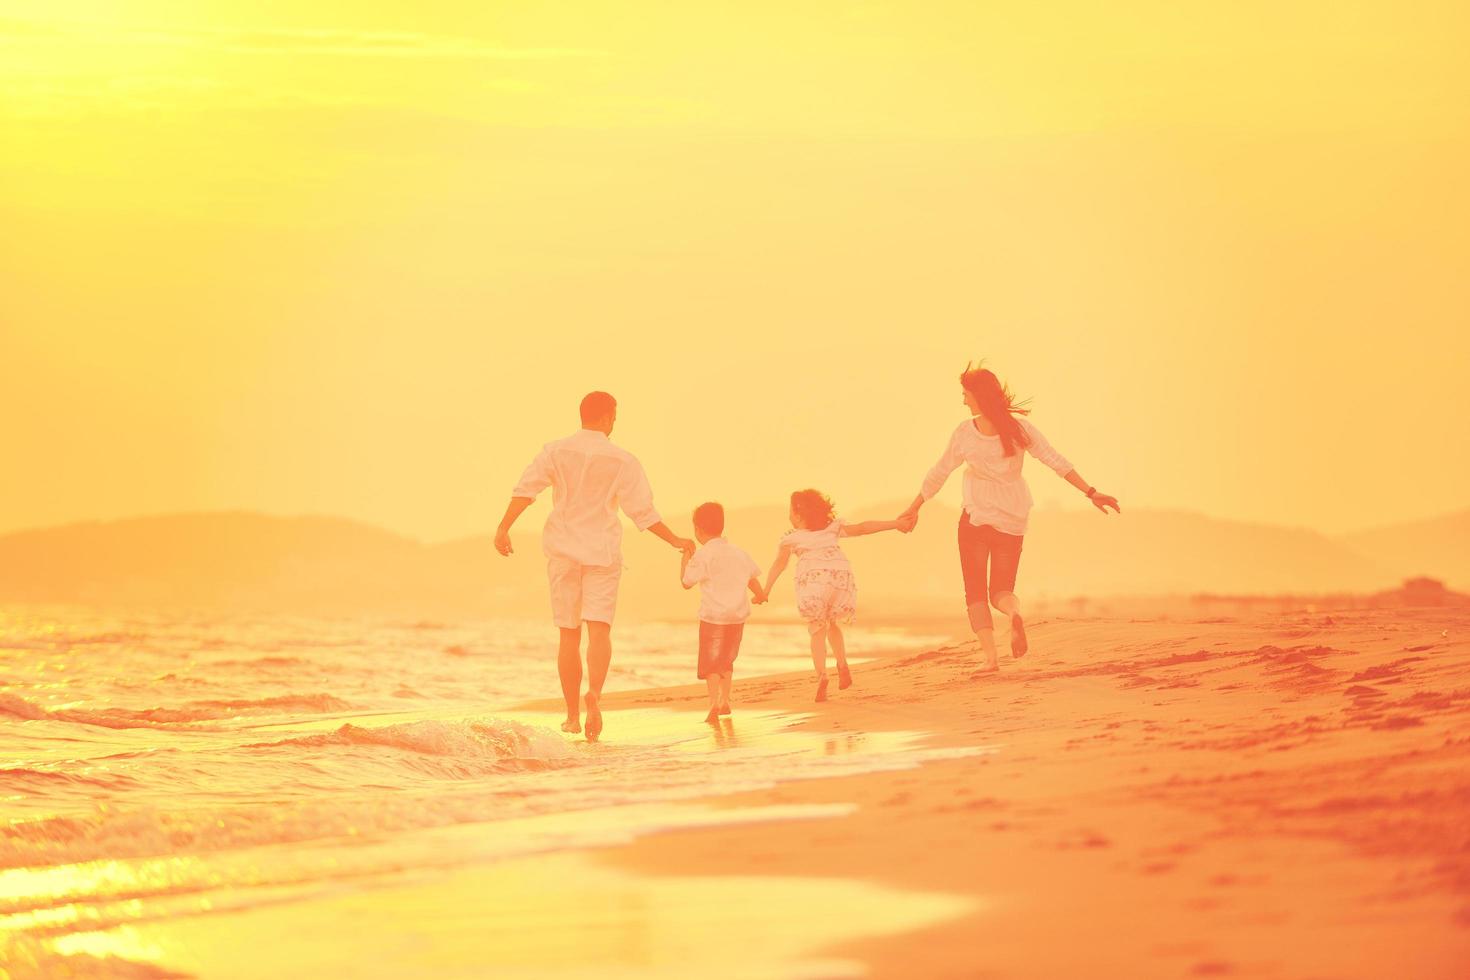 happy young family have fun on beach at sunset photo